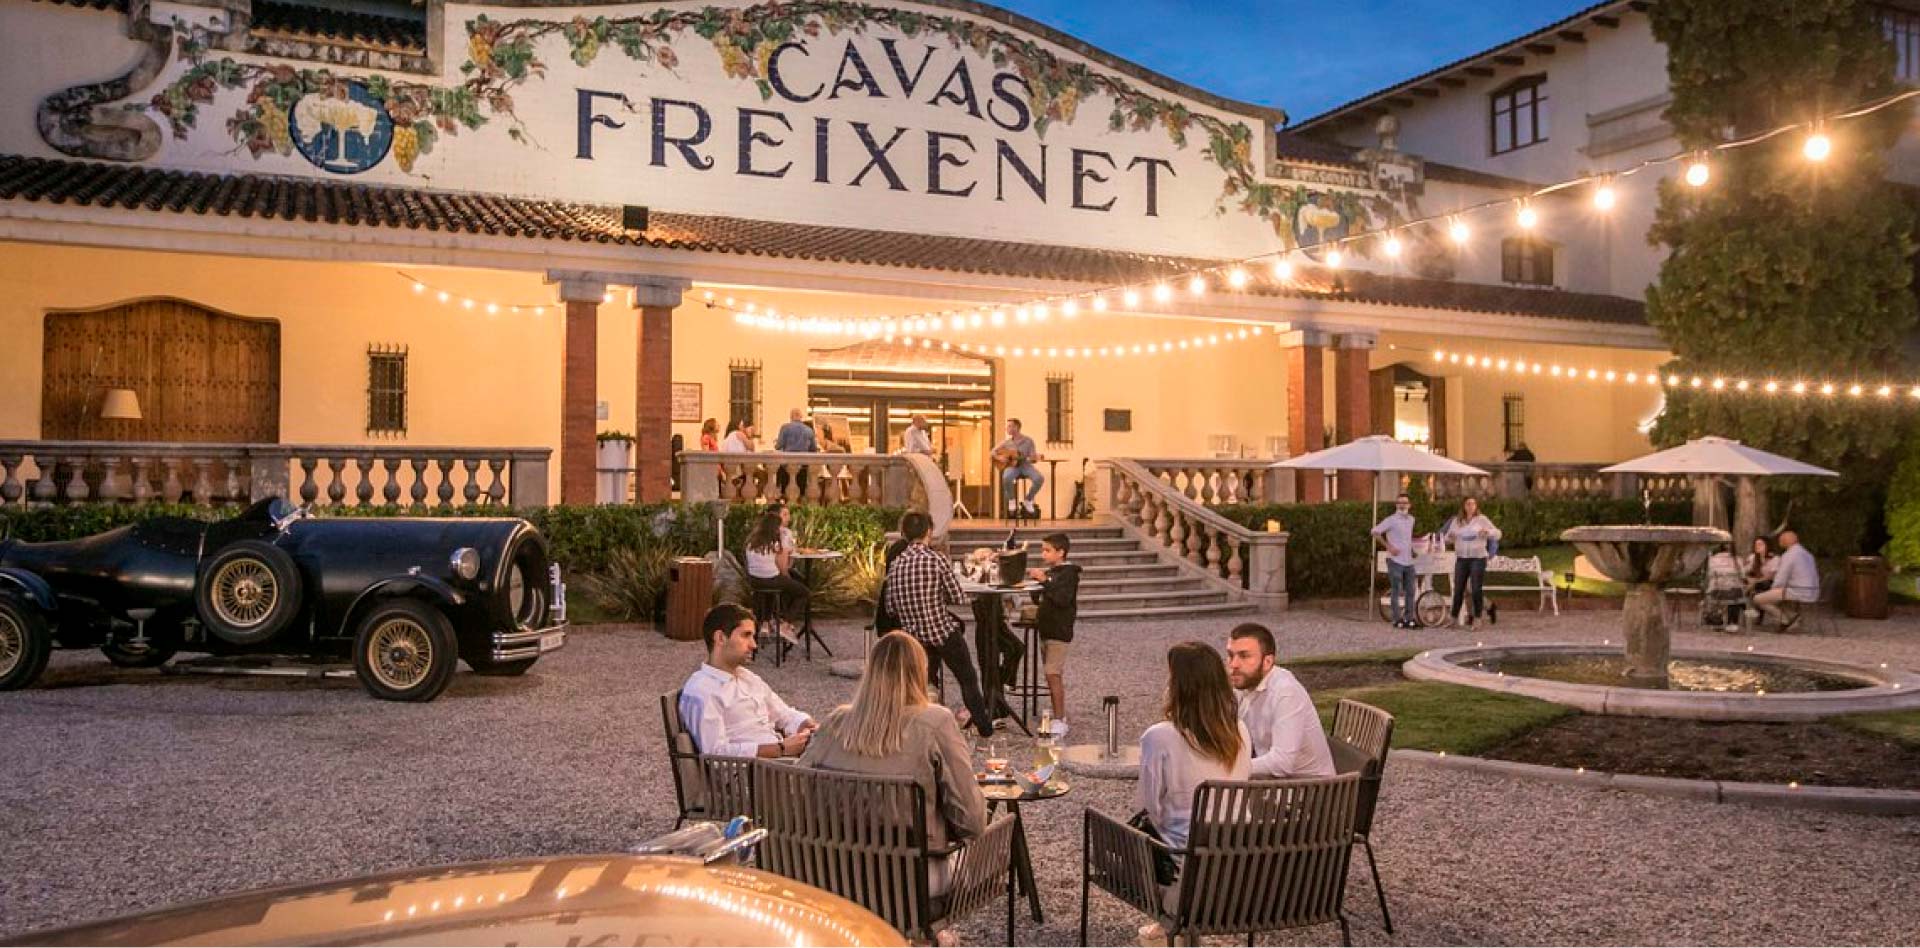 Freixenet Cava headquarters at night with a fountain in front and strung lights in the evening. Groups of people congregate at tables and walk up the stairs.